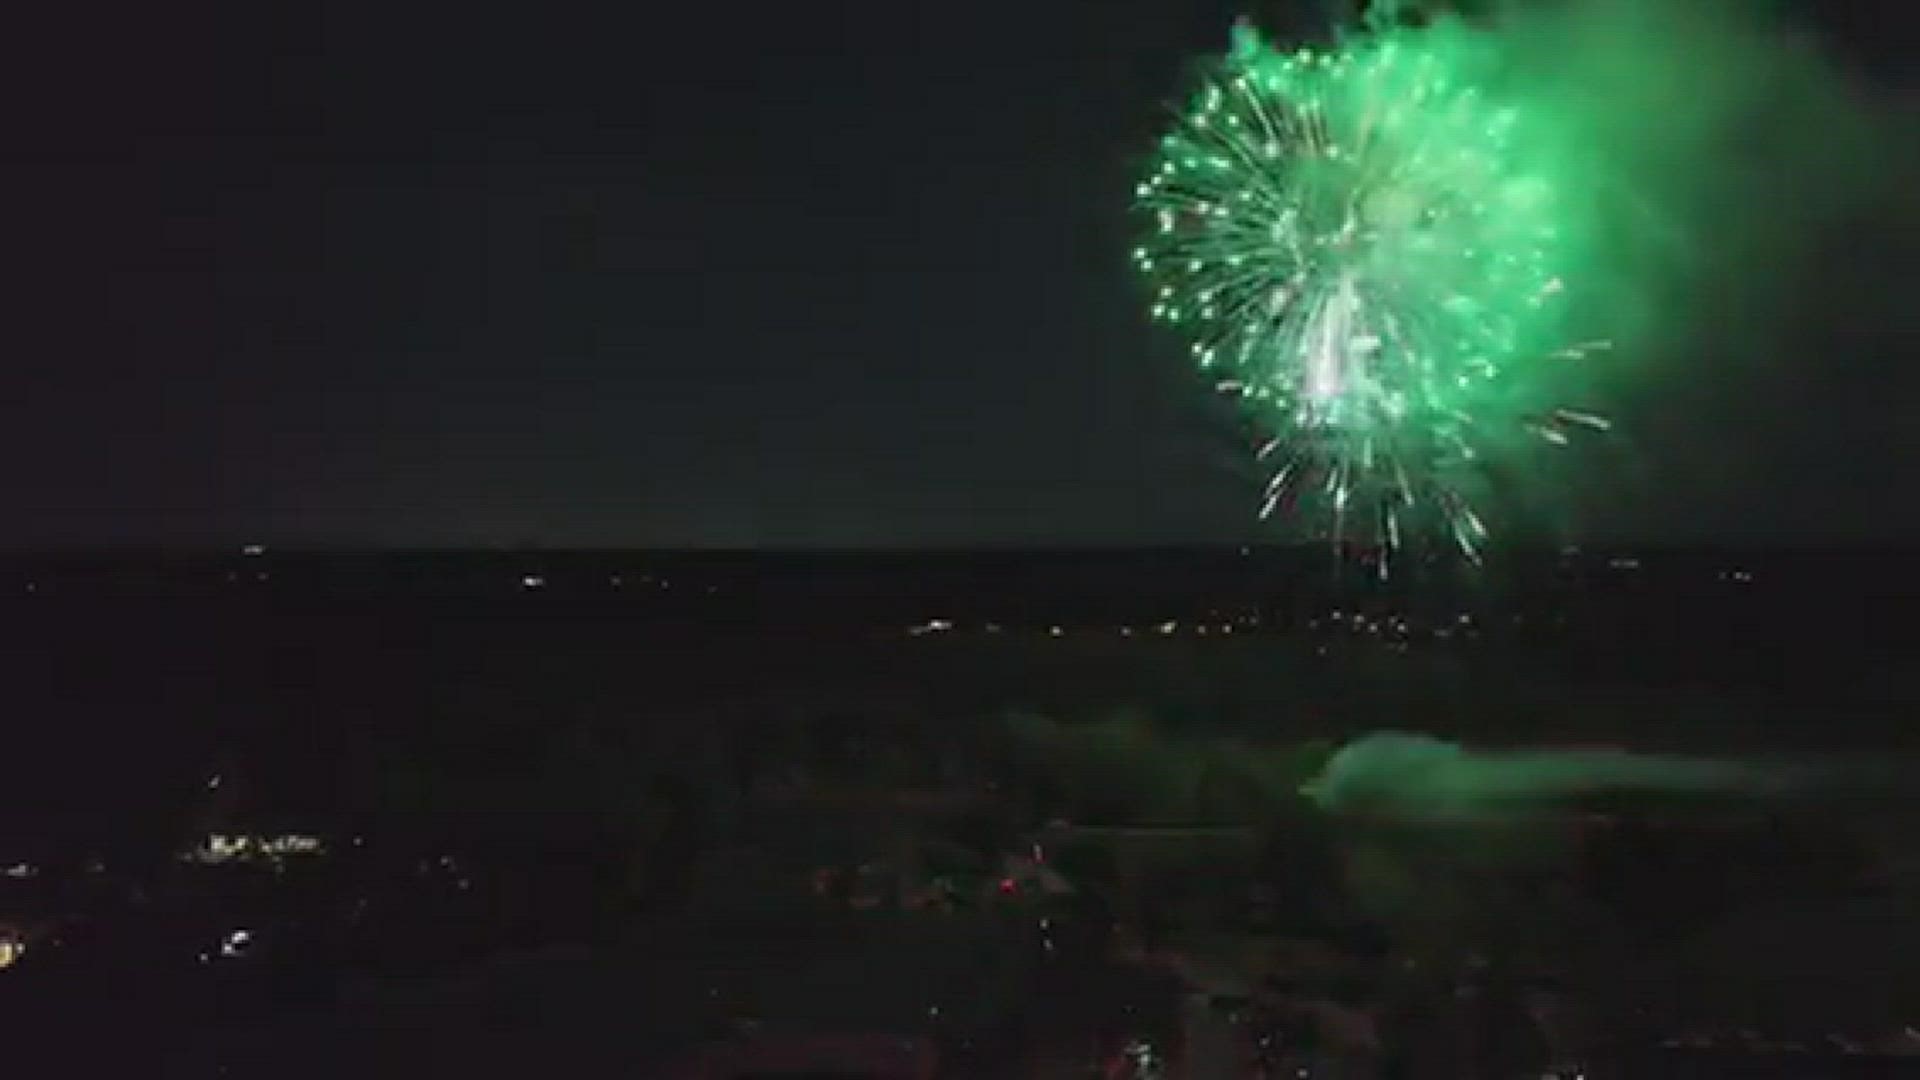 Fireworks - Olney Days Party in the Park
Credit: Tim Pruss, MyDrone.Pro